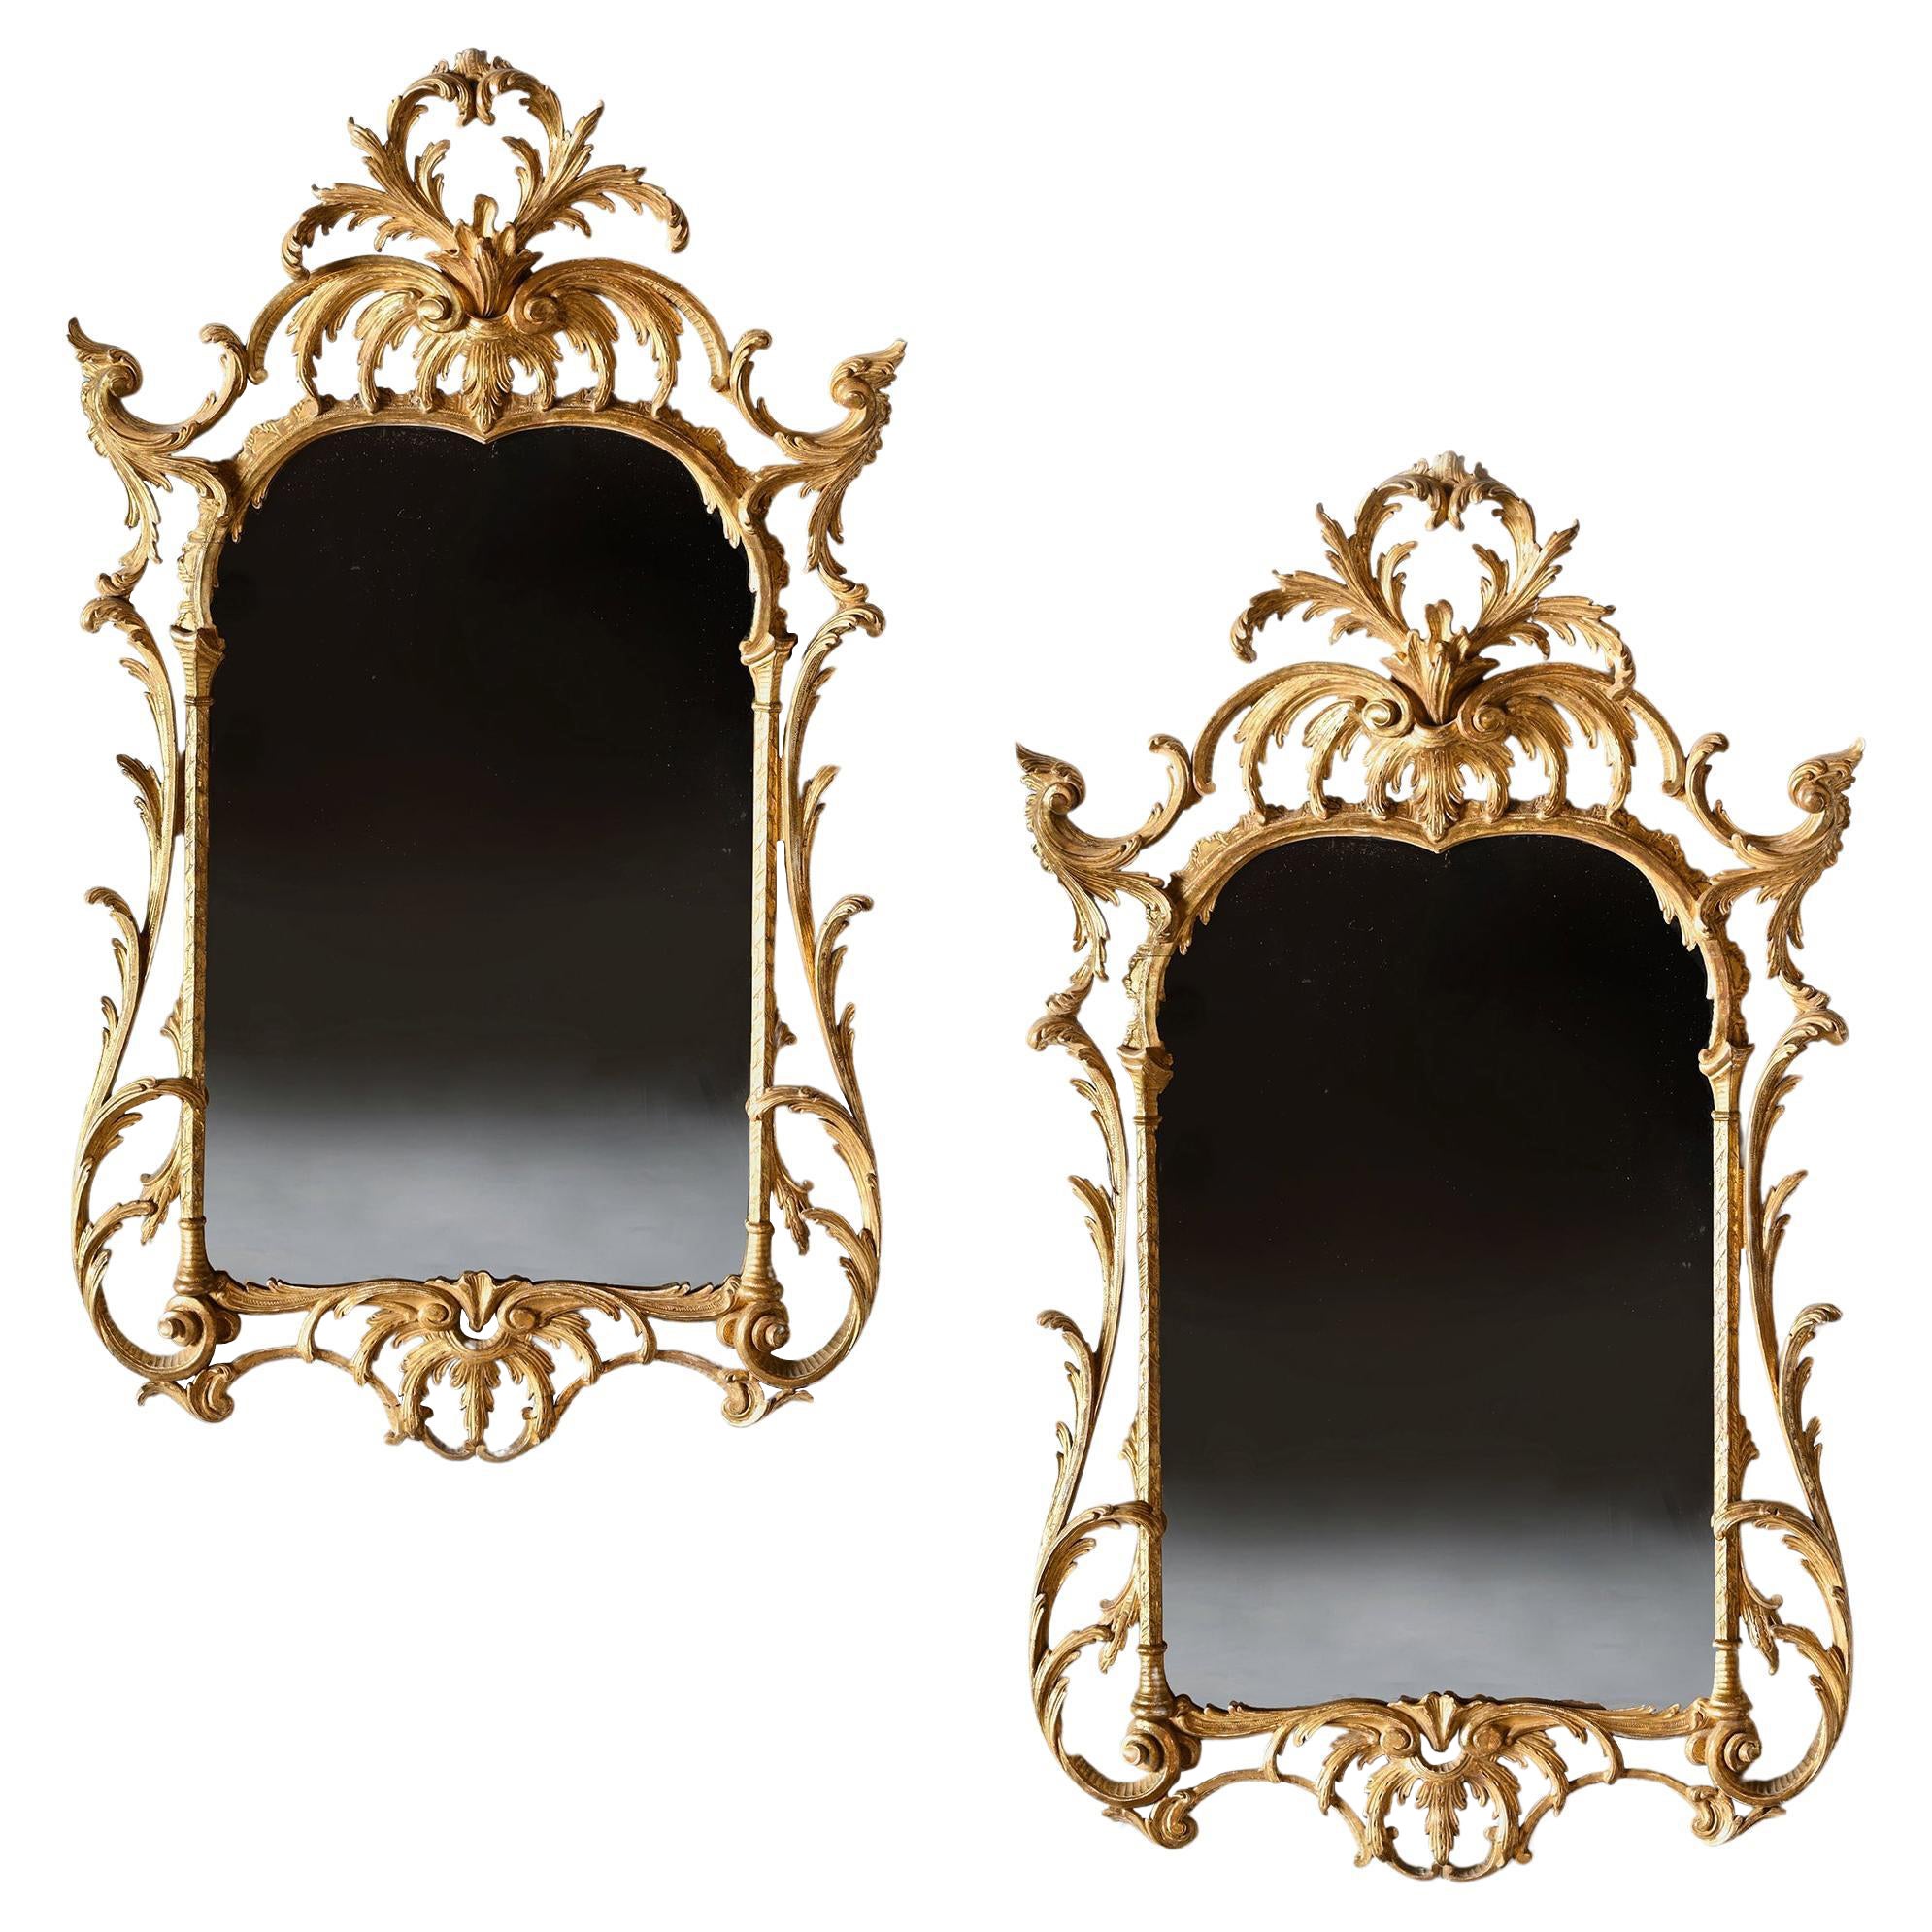 Fine Pair of Mid 20th Century English Giltwood Mirrors in the Late Rococo Style